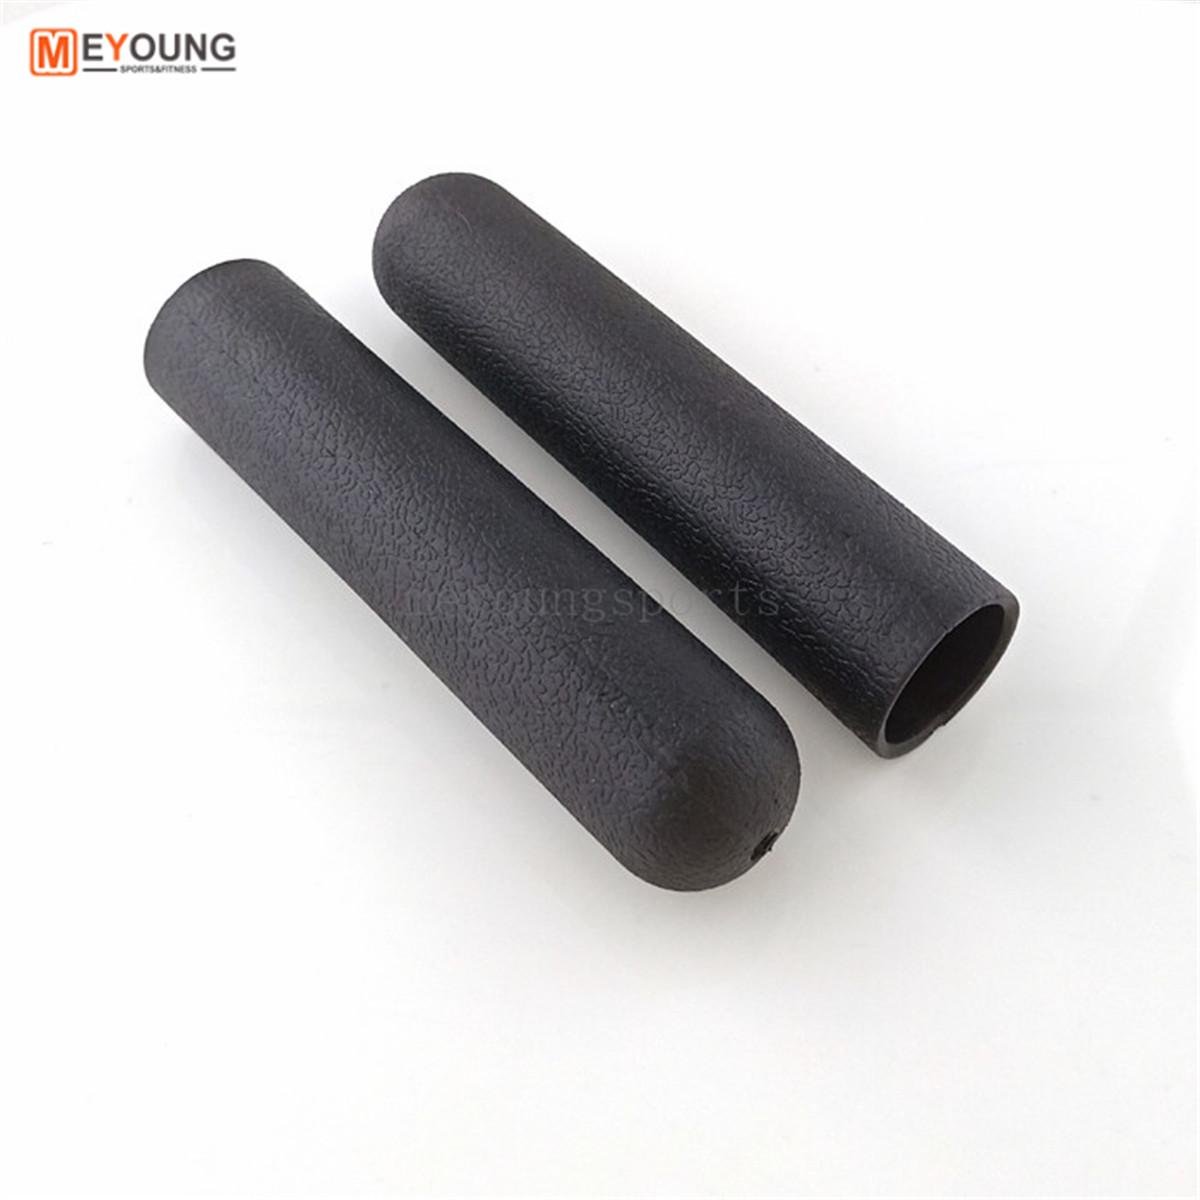 Exercise Bike Gym Equipment Hand Grip and End Cap